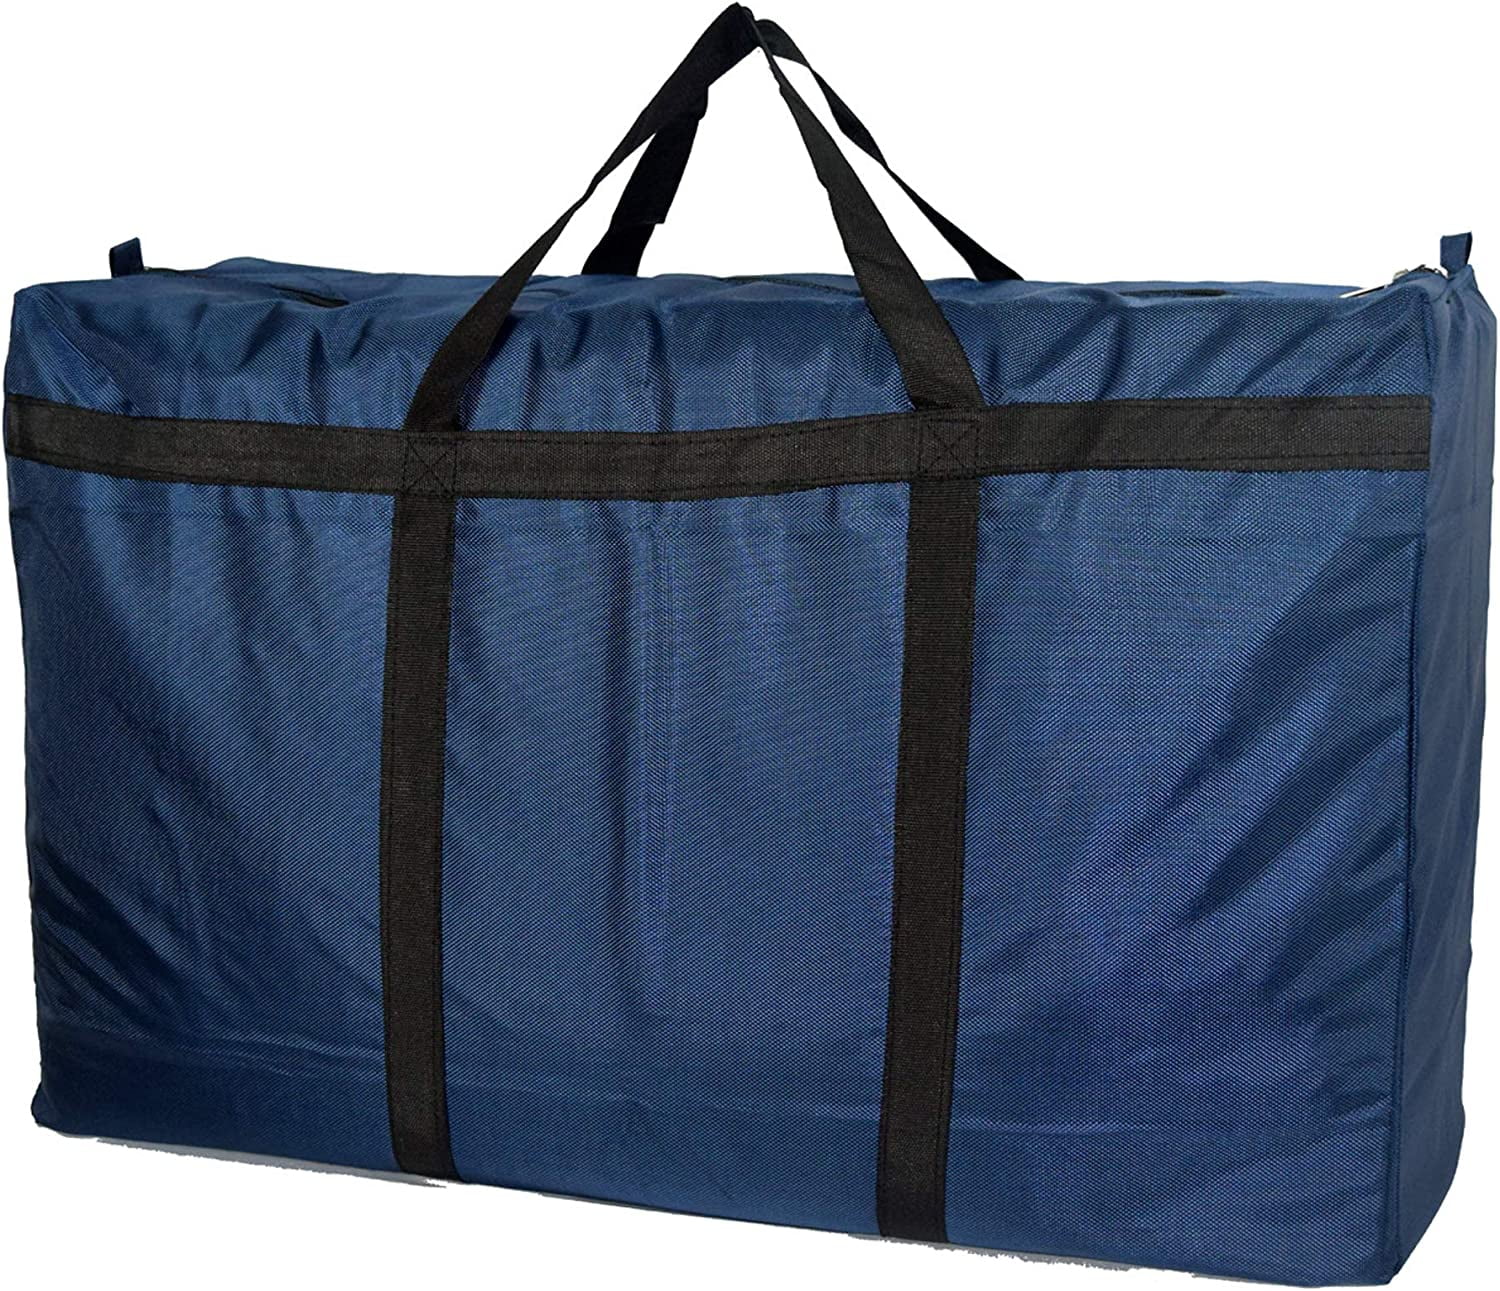 Nvzi 100L Extra Large Storage Bags, Sturdy Foldable Water Resistant ...